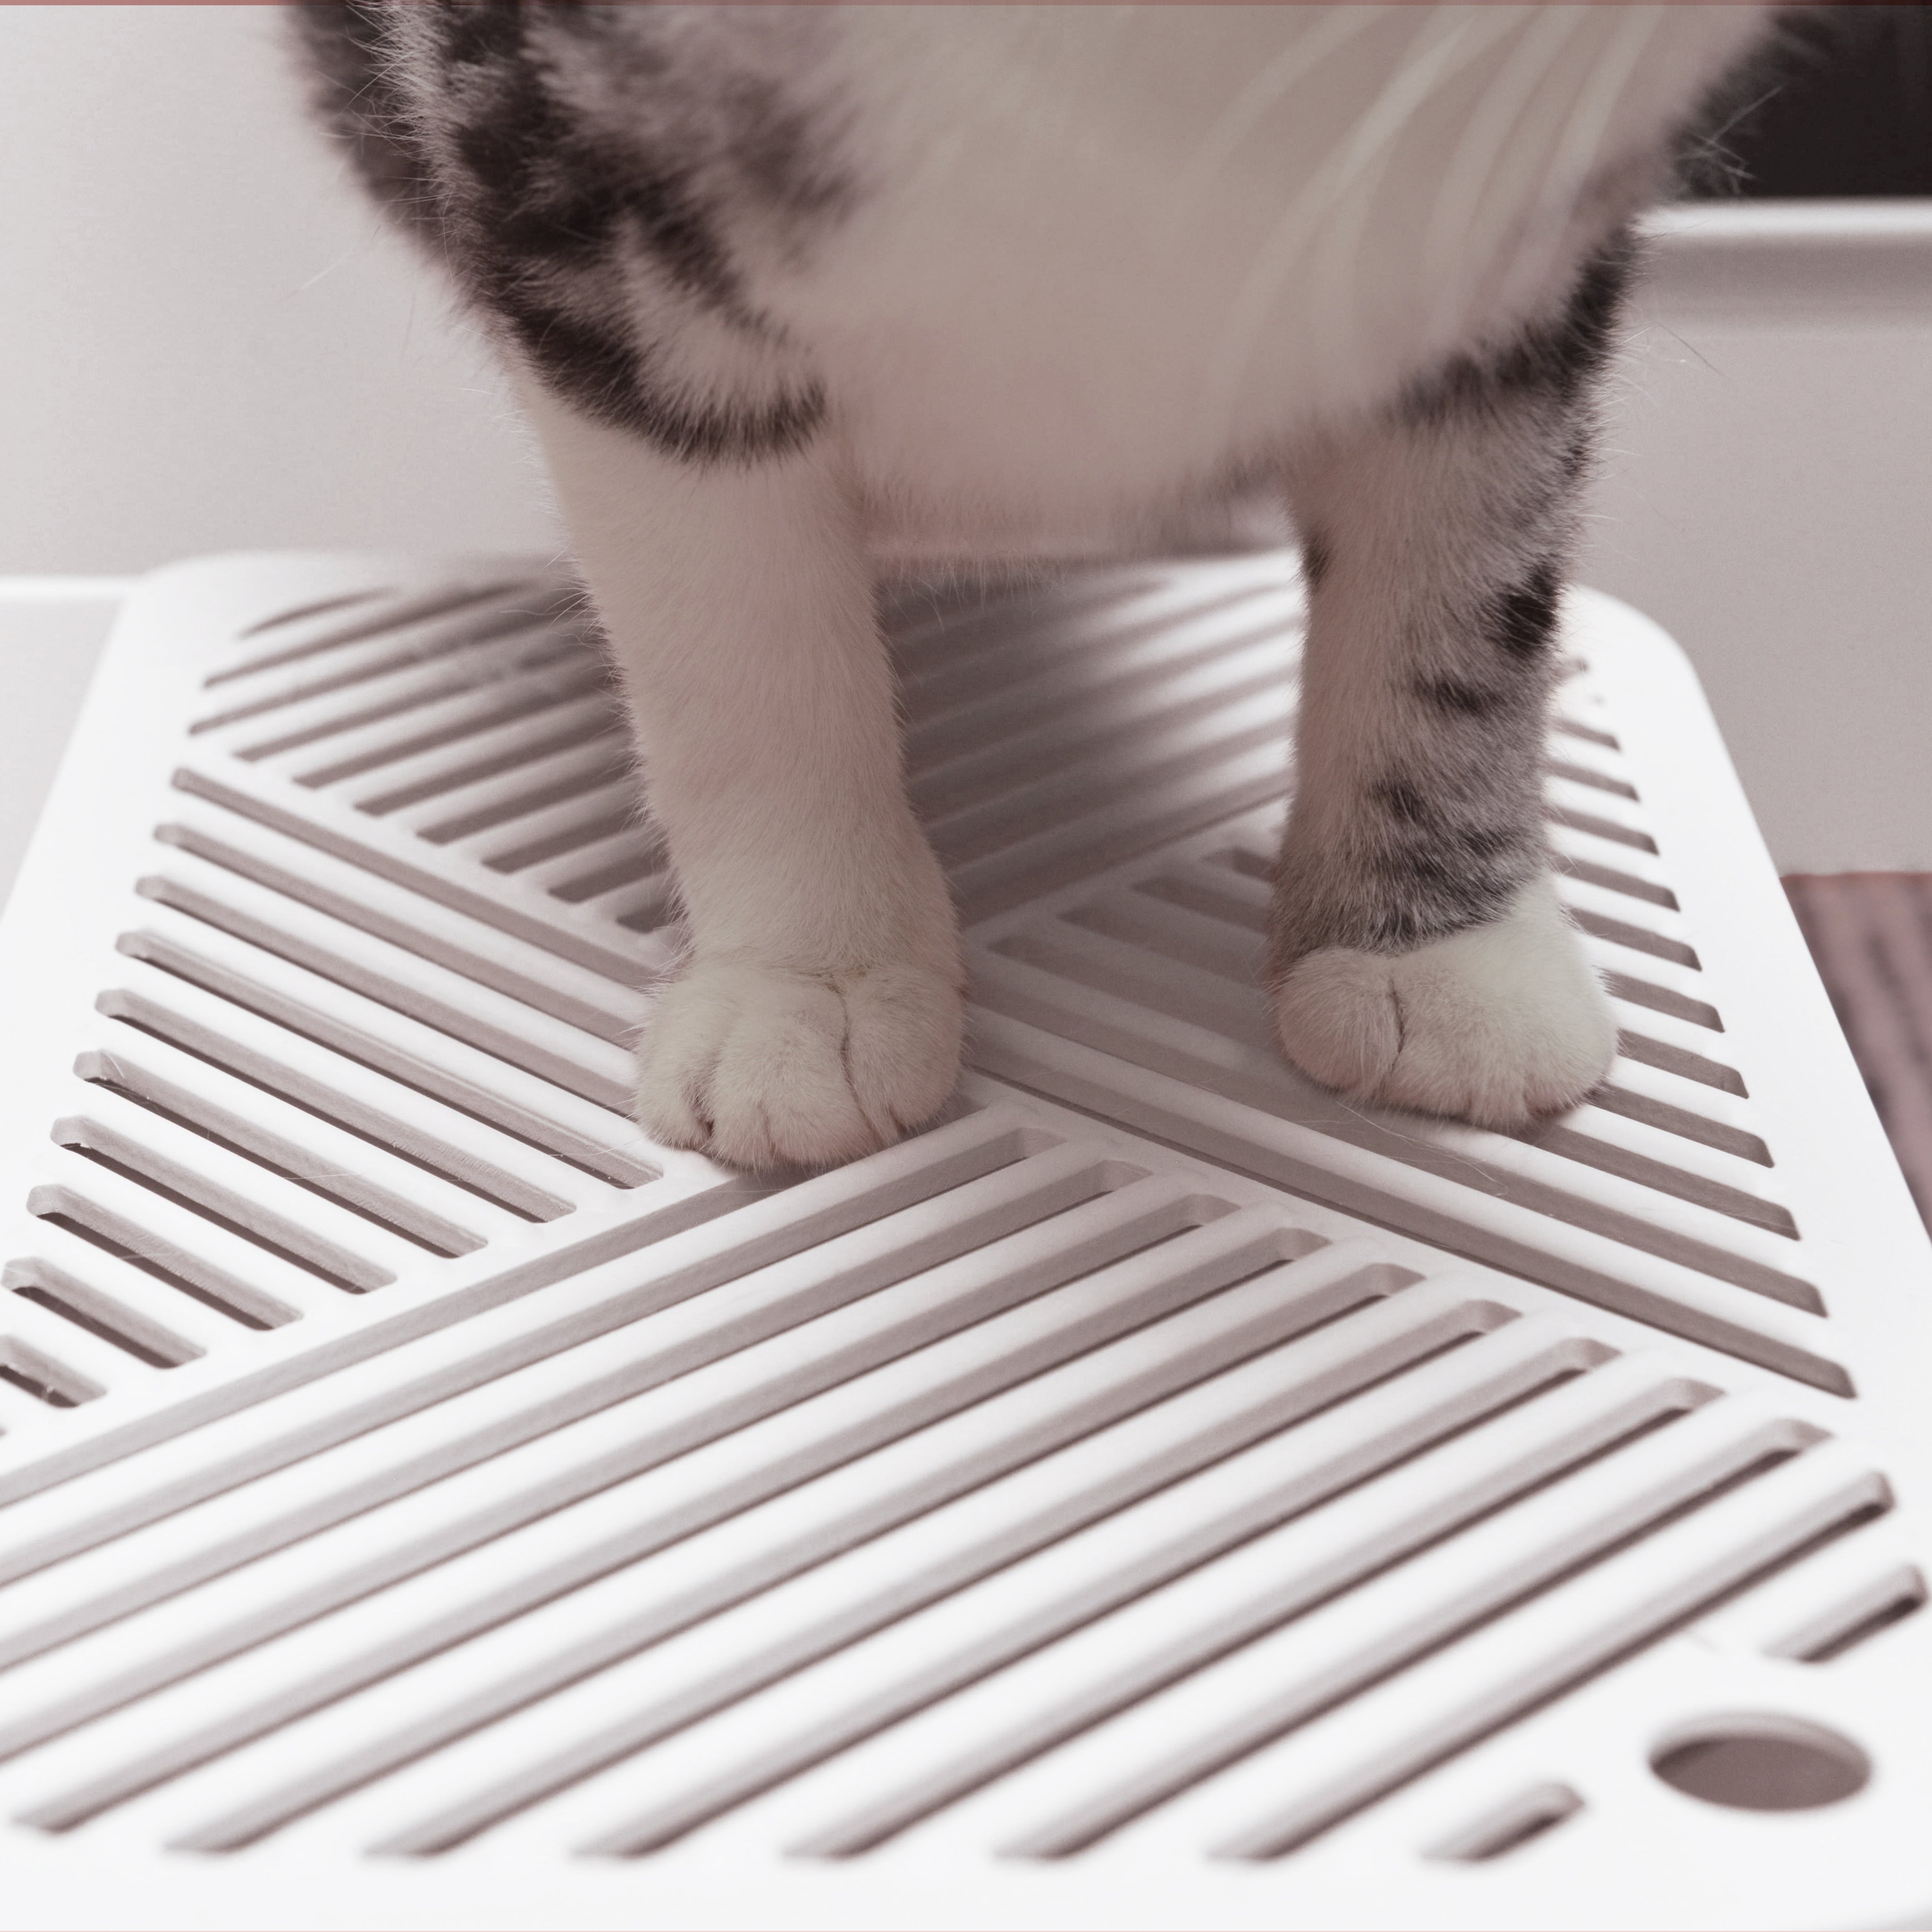 Meowy Studio Loo Cat Litter Box All in One Cover Litter Filter Plate Scoop and Holder in Aspen White